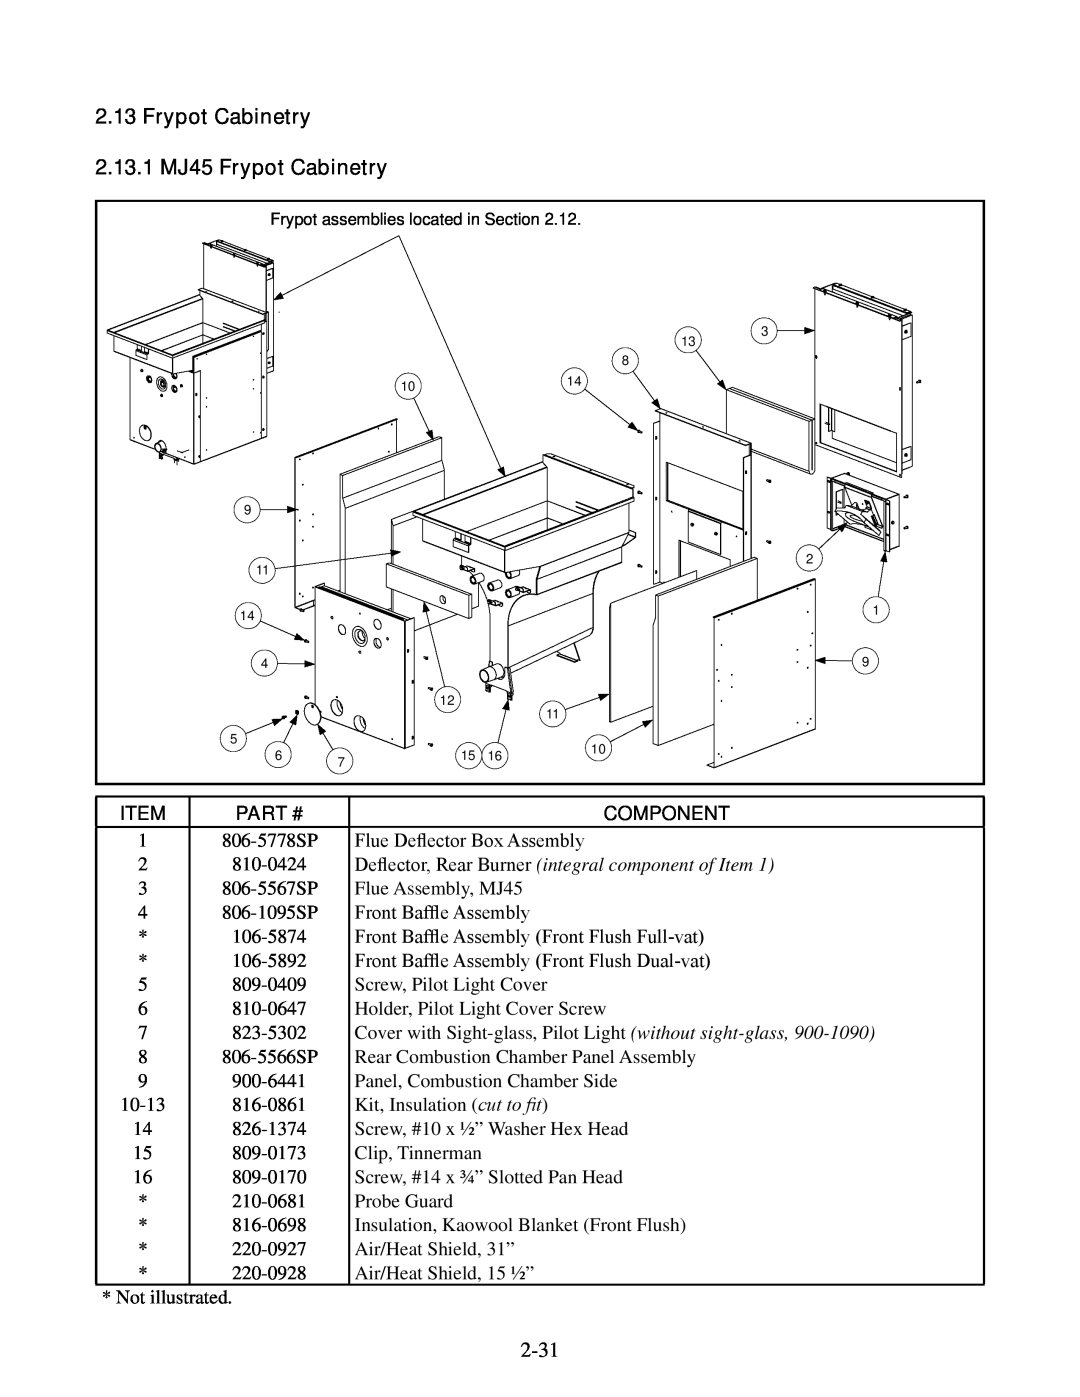 Frymaster 35 manual Frypot Cabinetry 2.13.1 MJ45 Frypot Cabinetry, Part #, Kit, Insulation cut to fit, Probe Guard 